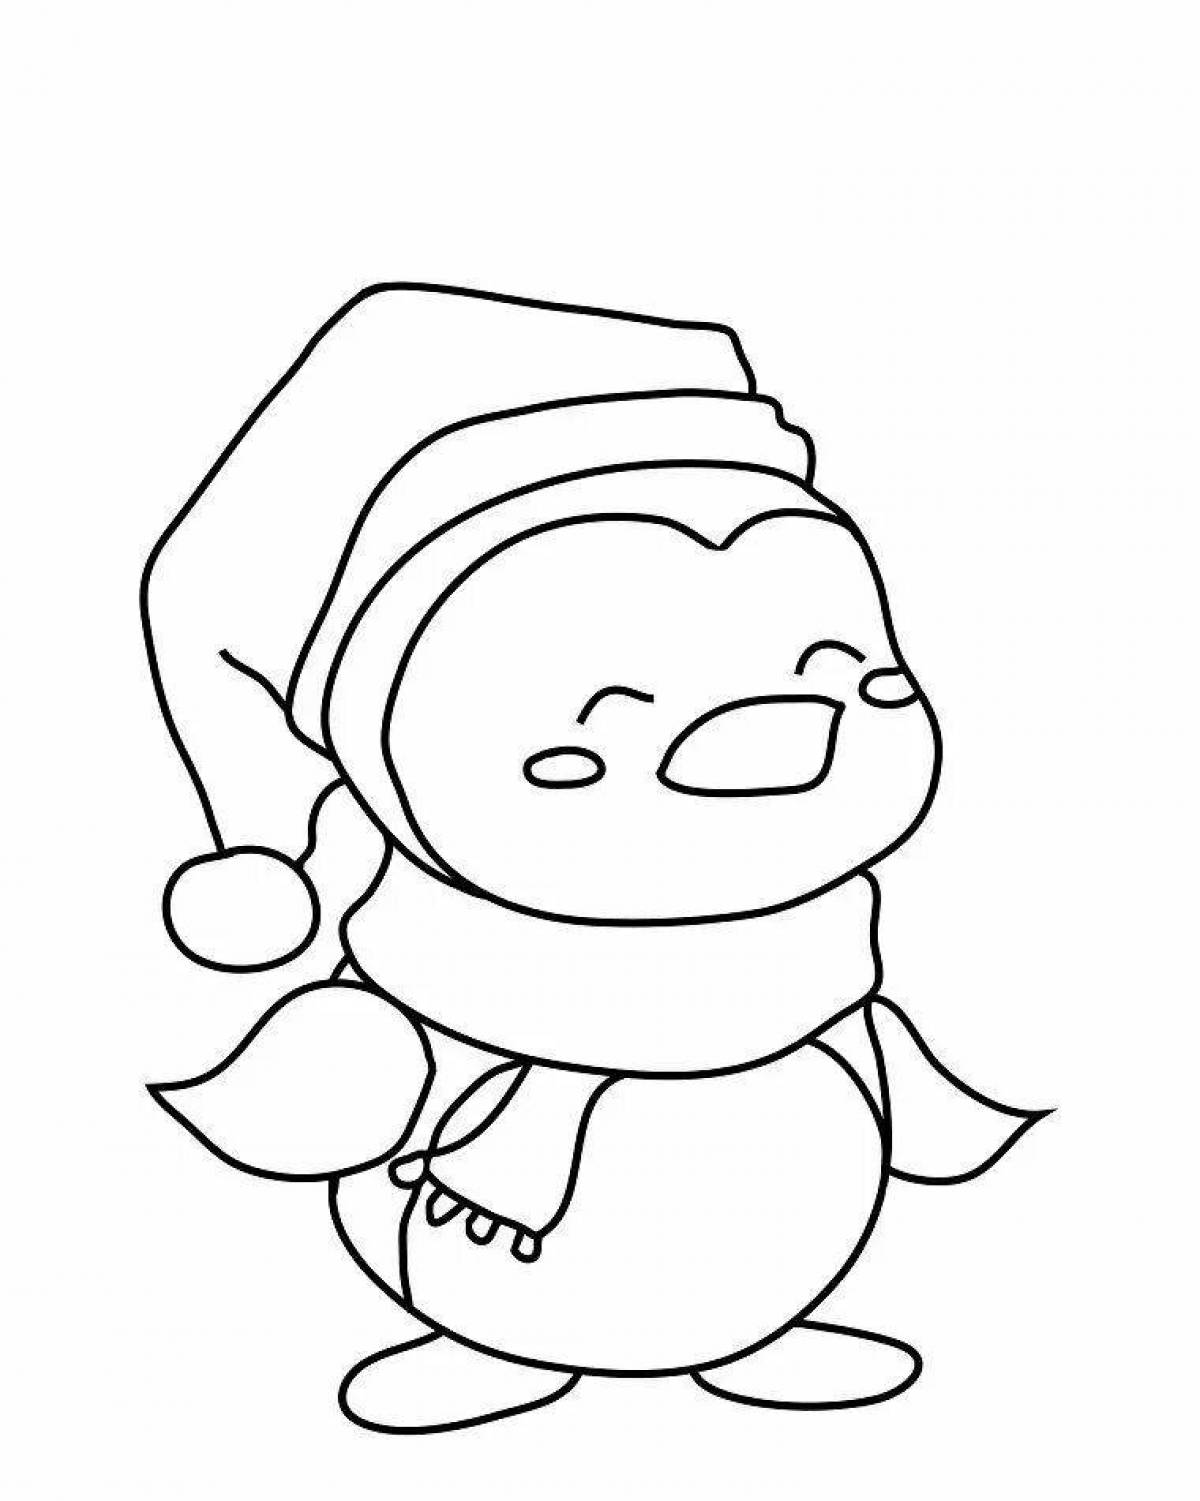 Adorable Christmas penguin coloring page